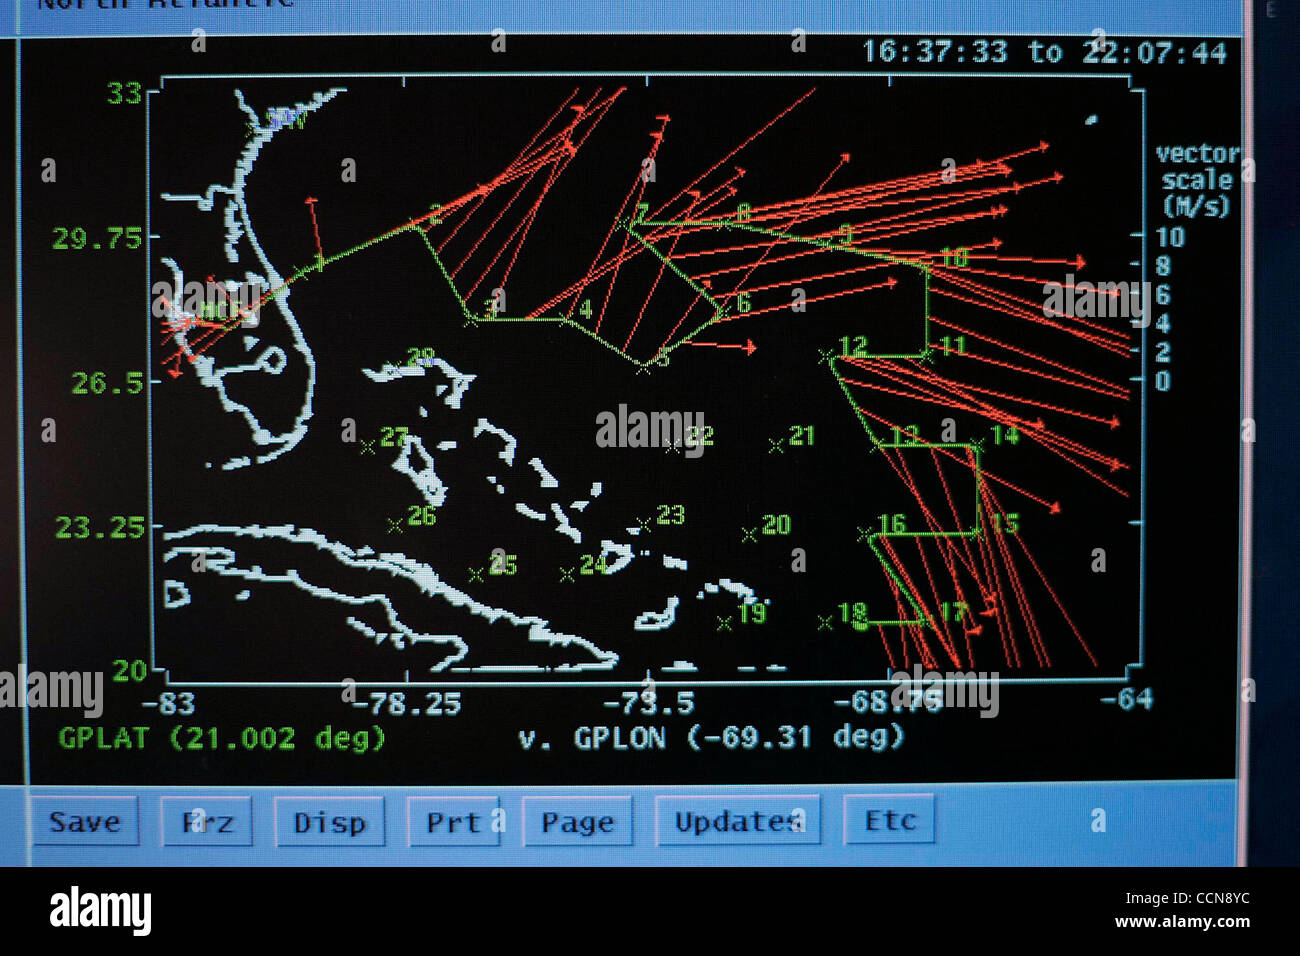 A computer monitor shows the flight path of the Hurricane Hunter Thursday, September 2, 2004 over Hurricane Frances in the Atlantic Ocean. The plane launches dropsondes over various parts of the hurricance which relay temperature, pressure, humidity, wind speed and direction back to the Gulfstream I Stock Photo